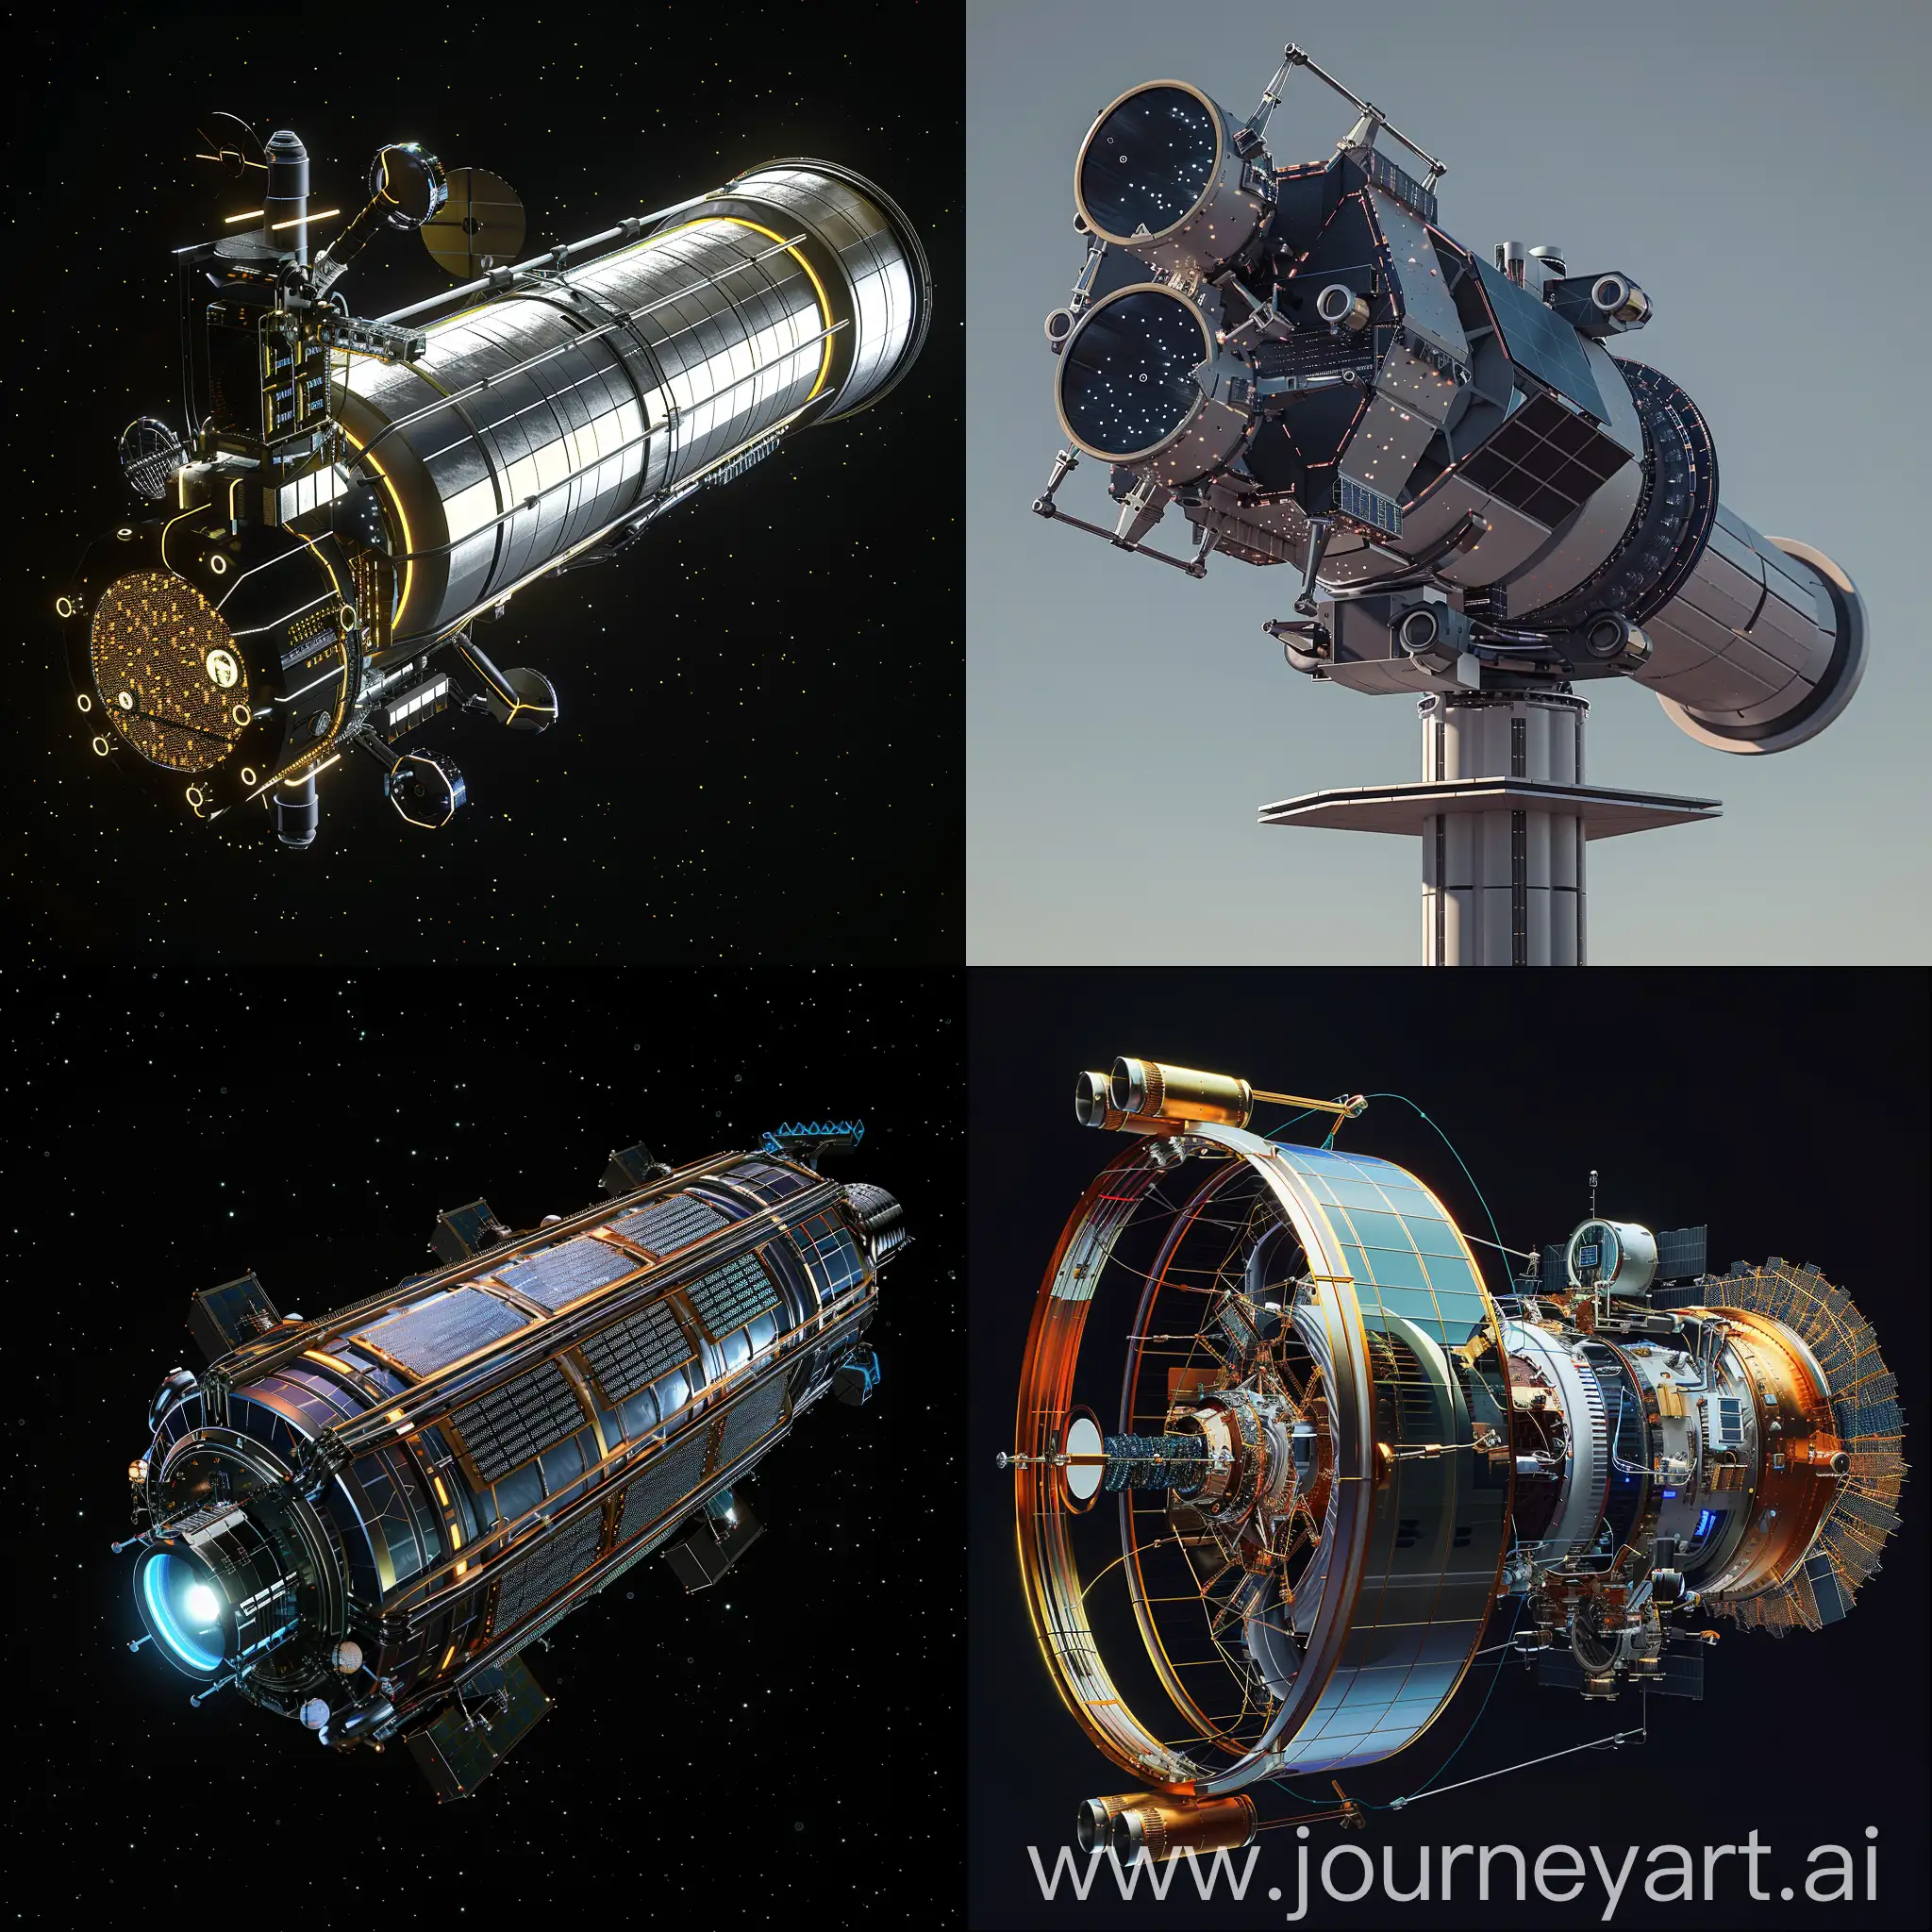 Futuristic-Space-Telescope-with-Quantum-Processing-Unit-QPU-and-AIBased-DecisionMaking-System